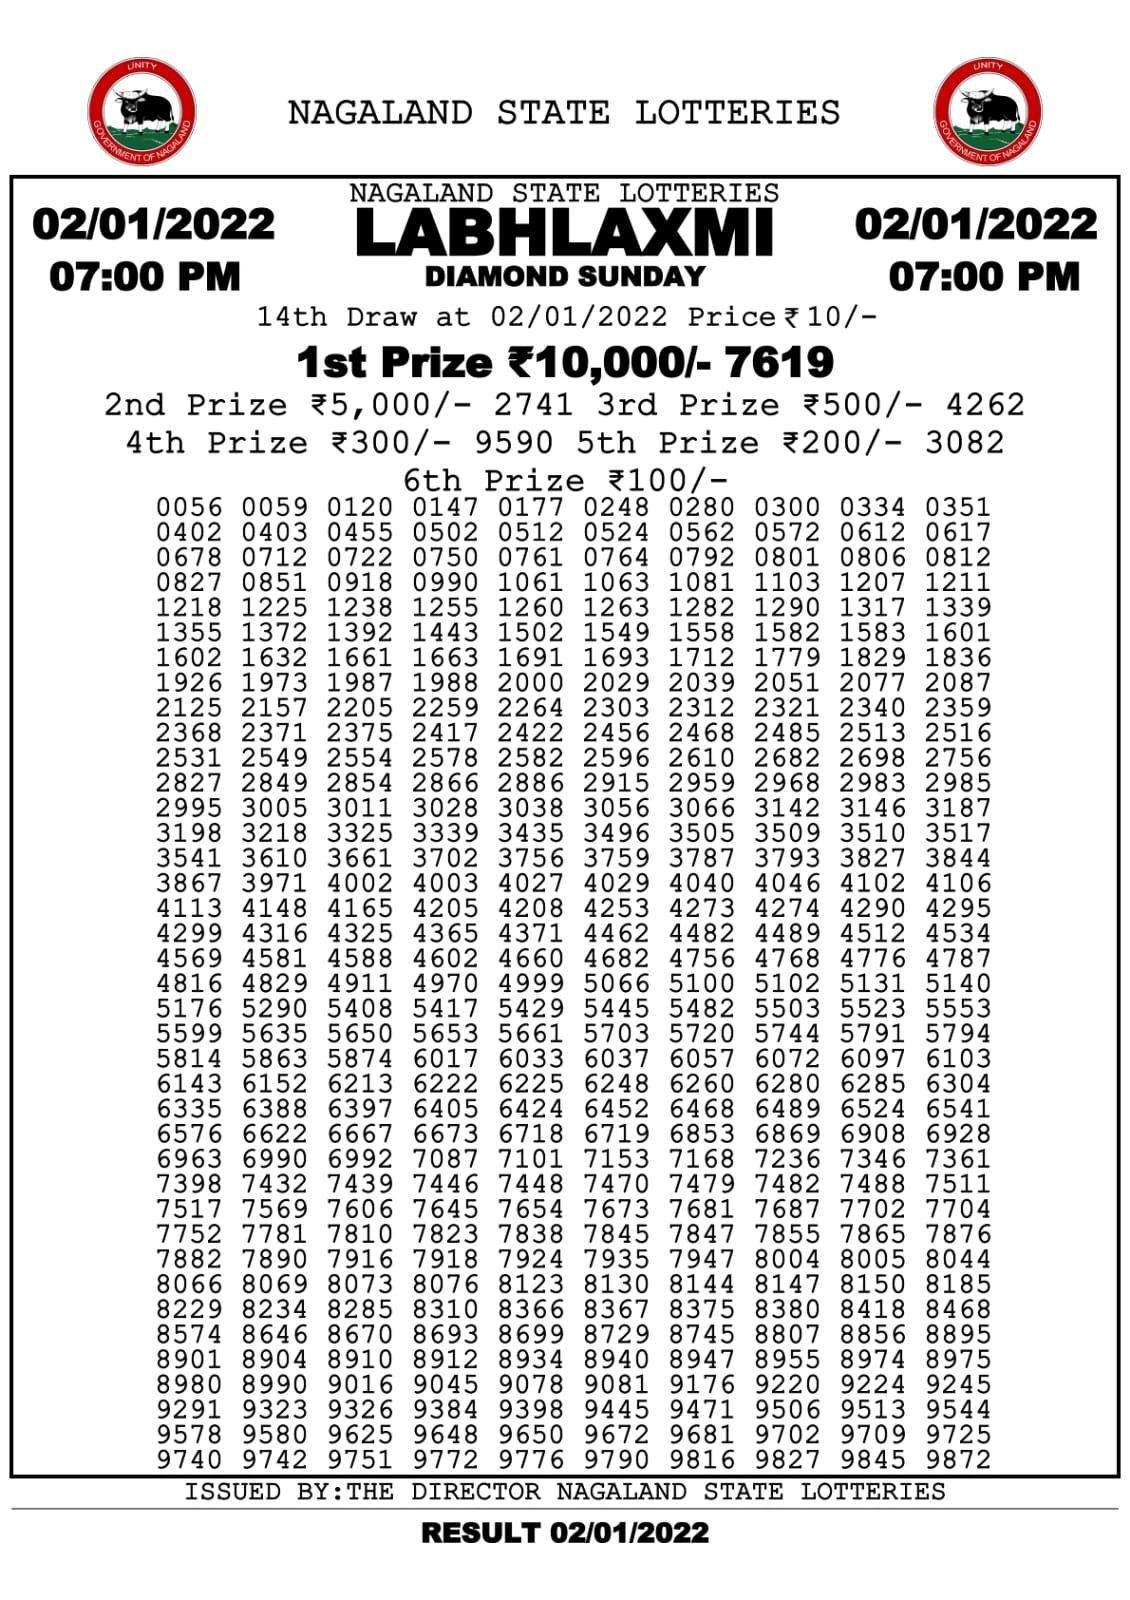 Labhlaxmi 7.00pm Lottery Result 02.01.2022